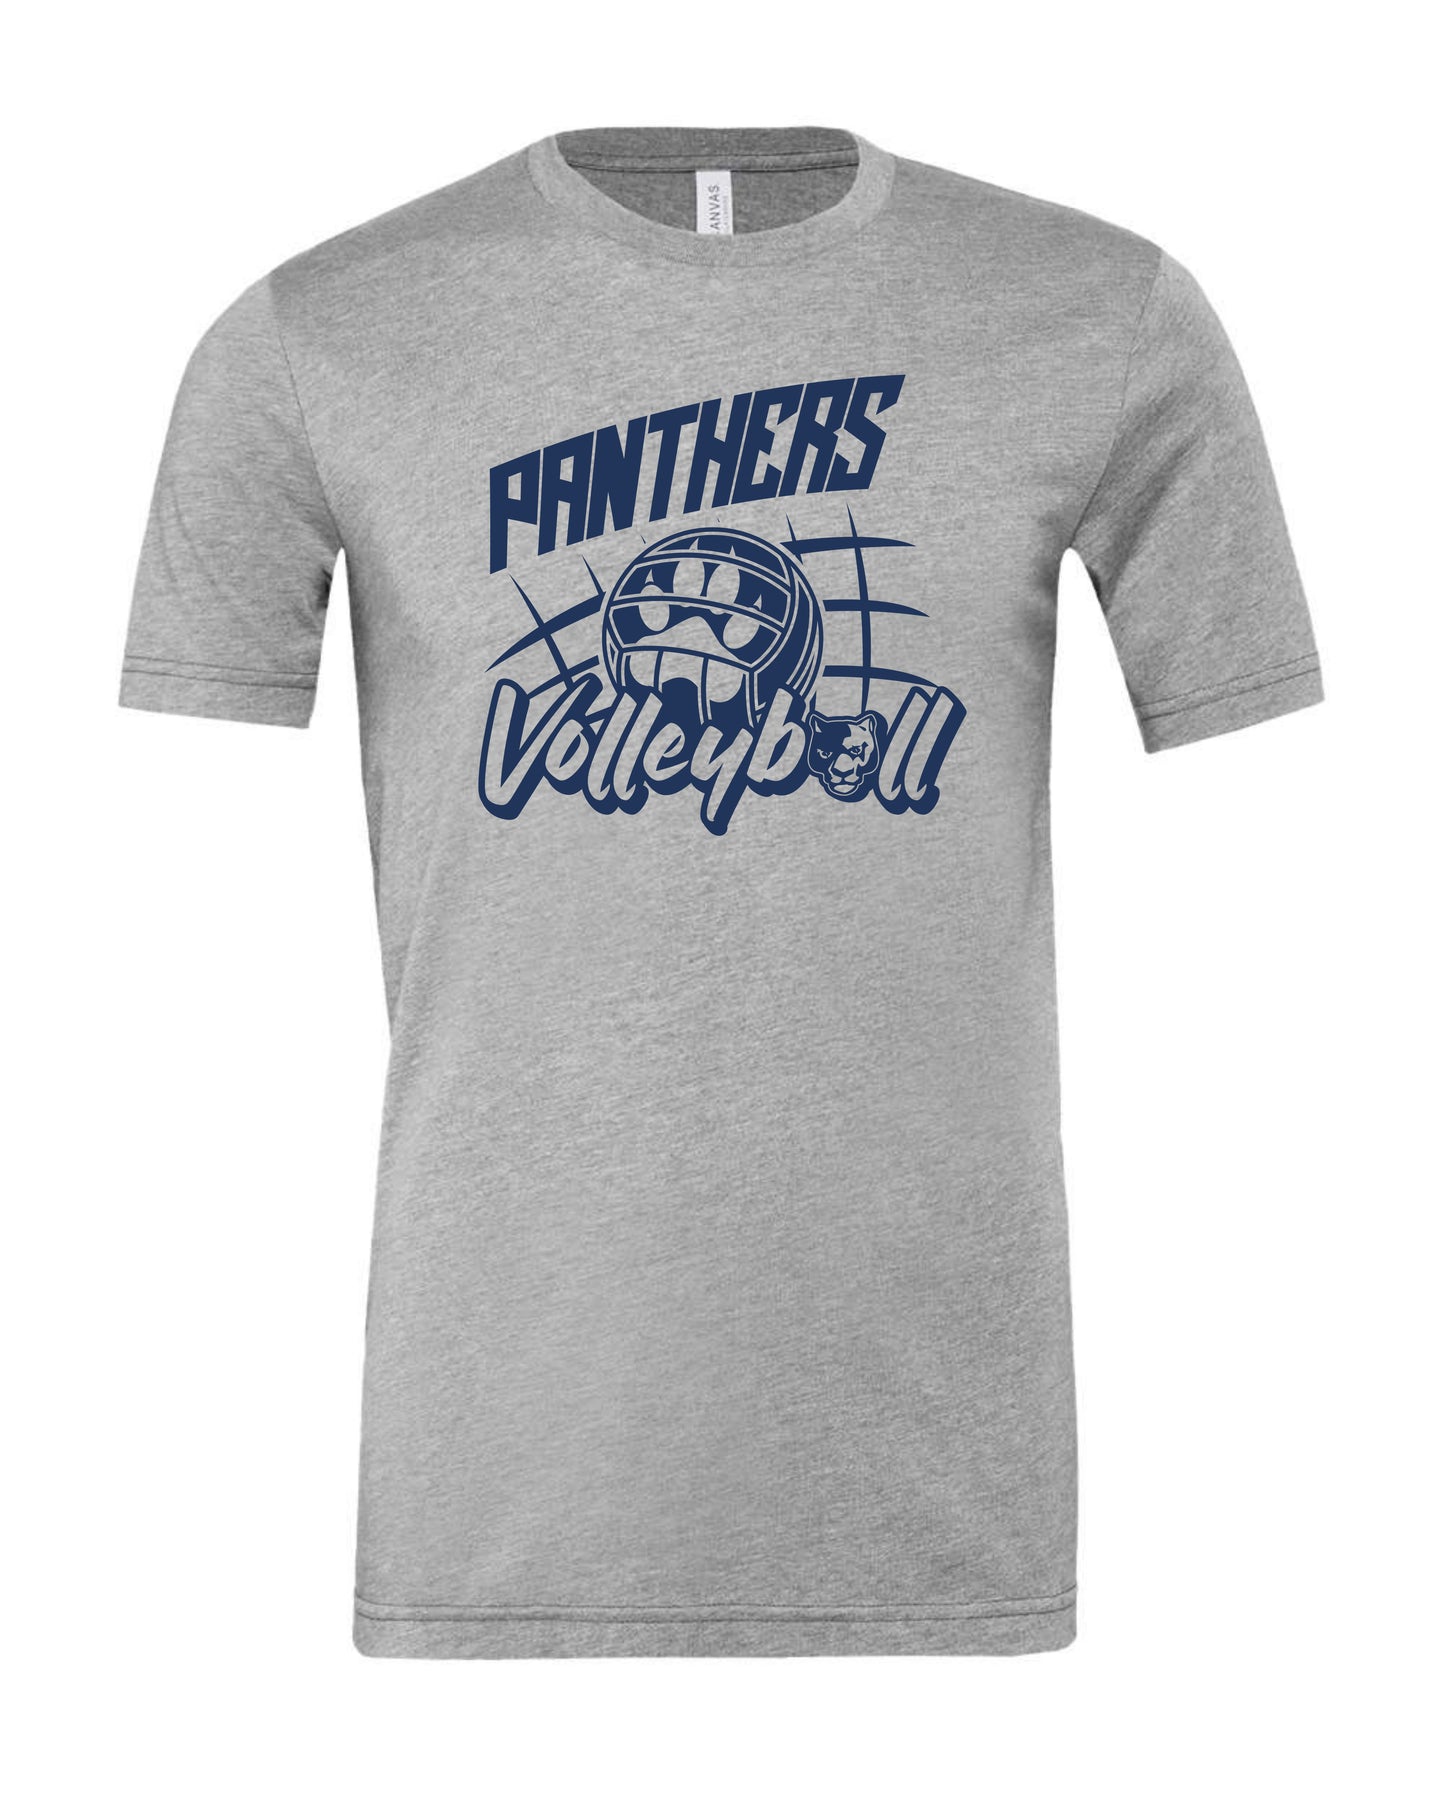 Panthers Volleyball Paw Ball- Youth Tee